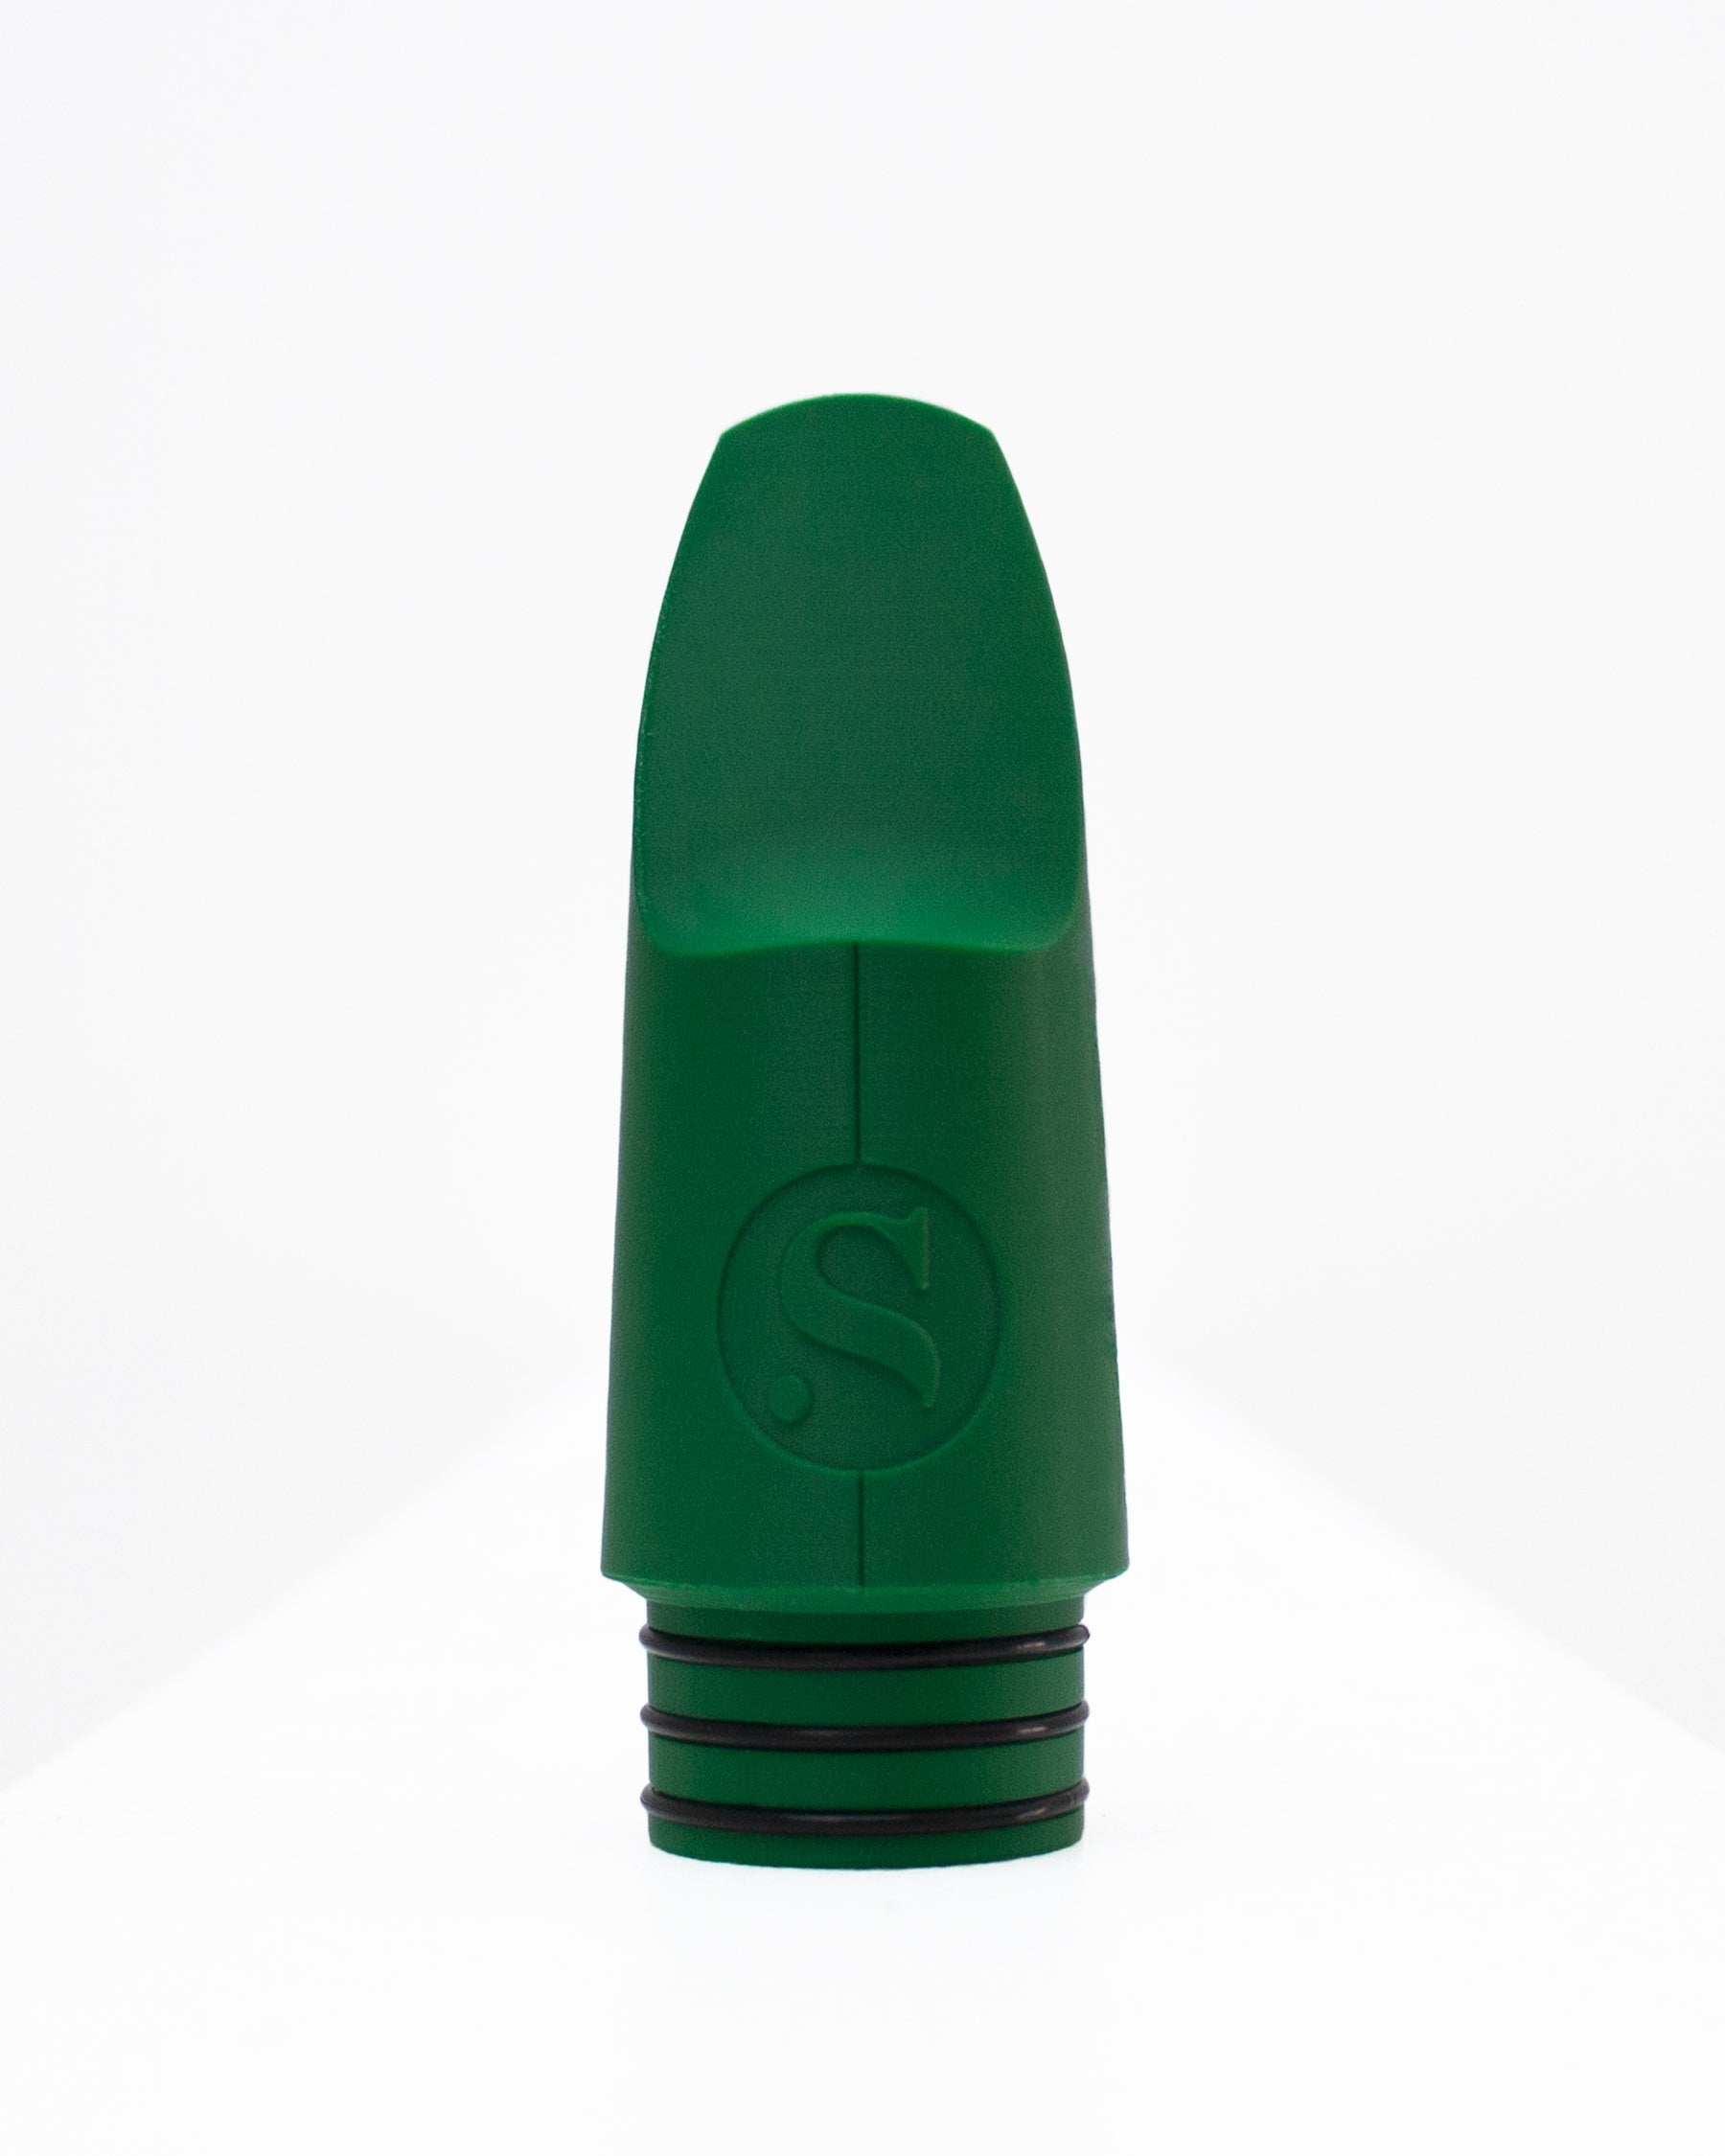 Bass Originals Clarinet mouthpiece - Steady by Syos - 7 / Forest Green